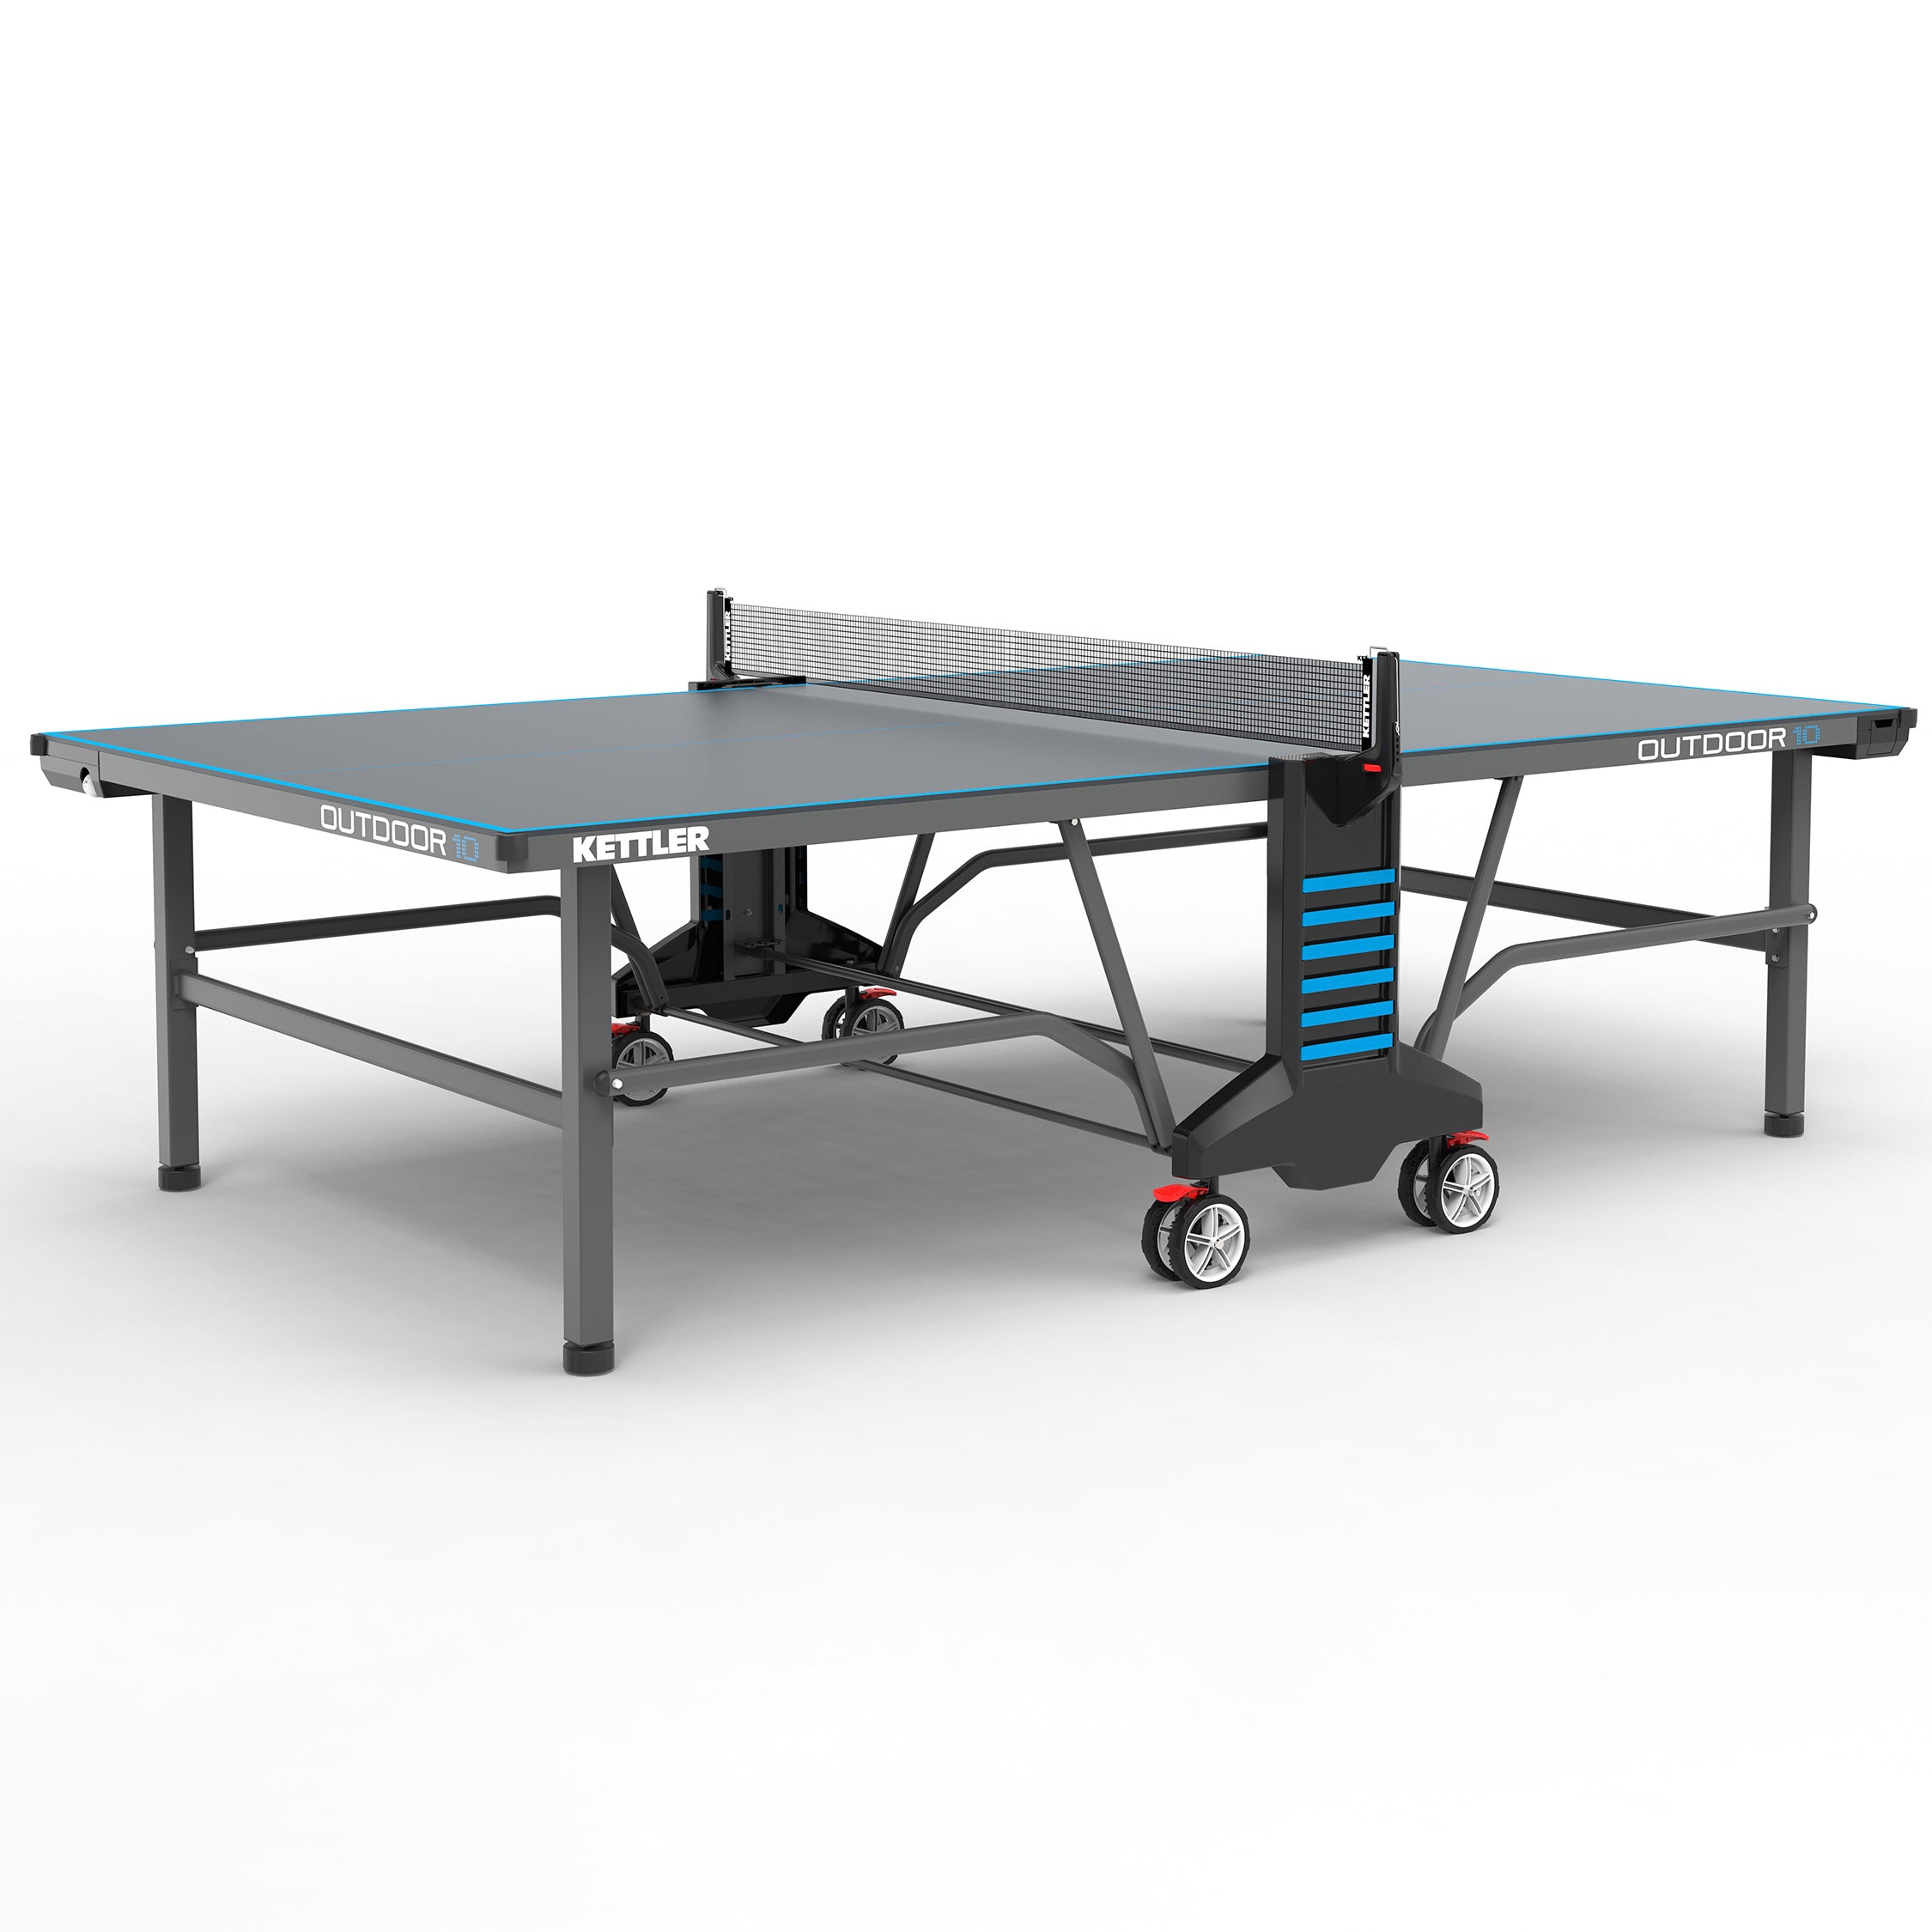 High quality outdoor table tennis table in play position